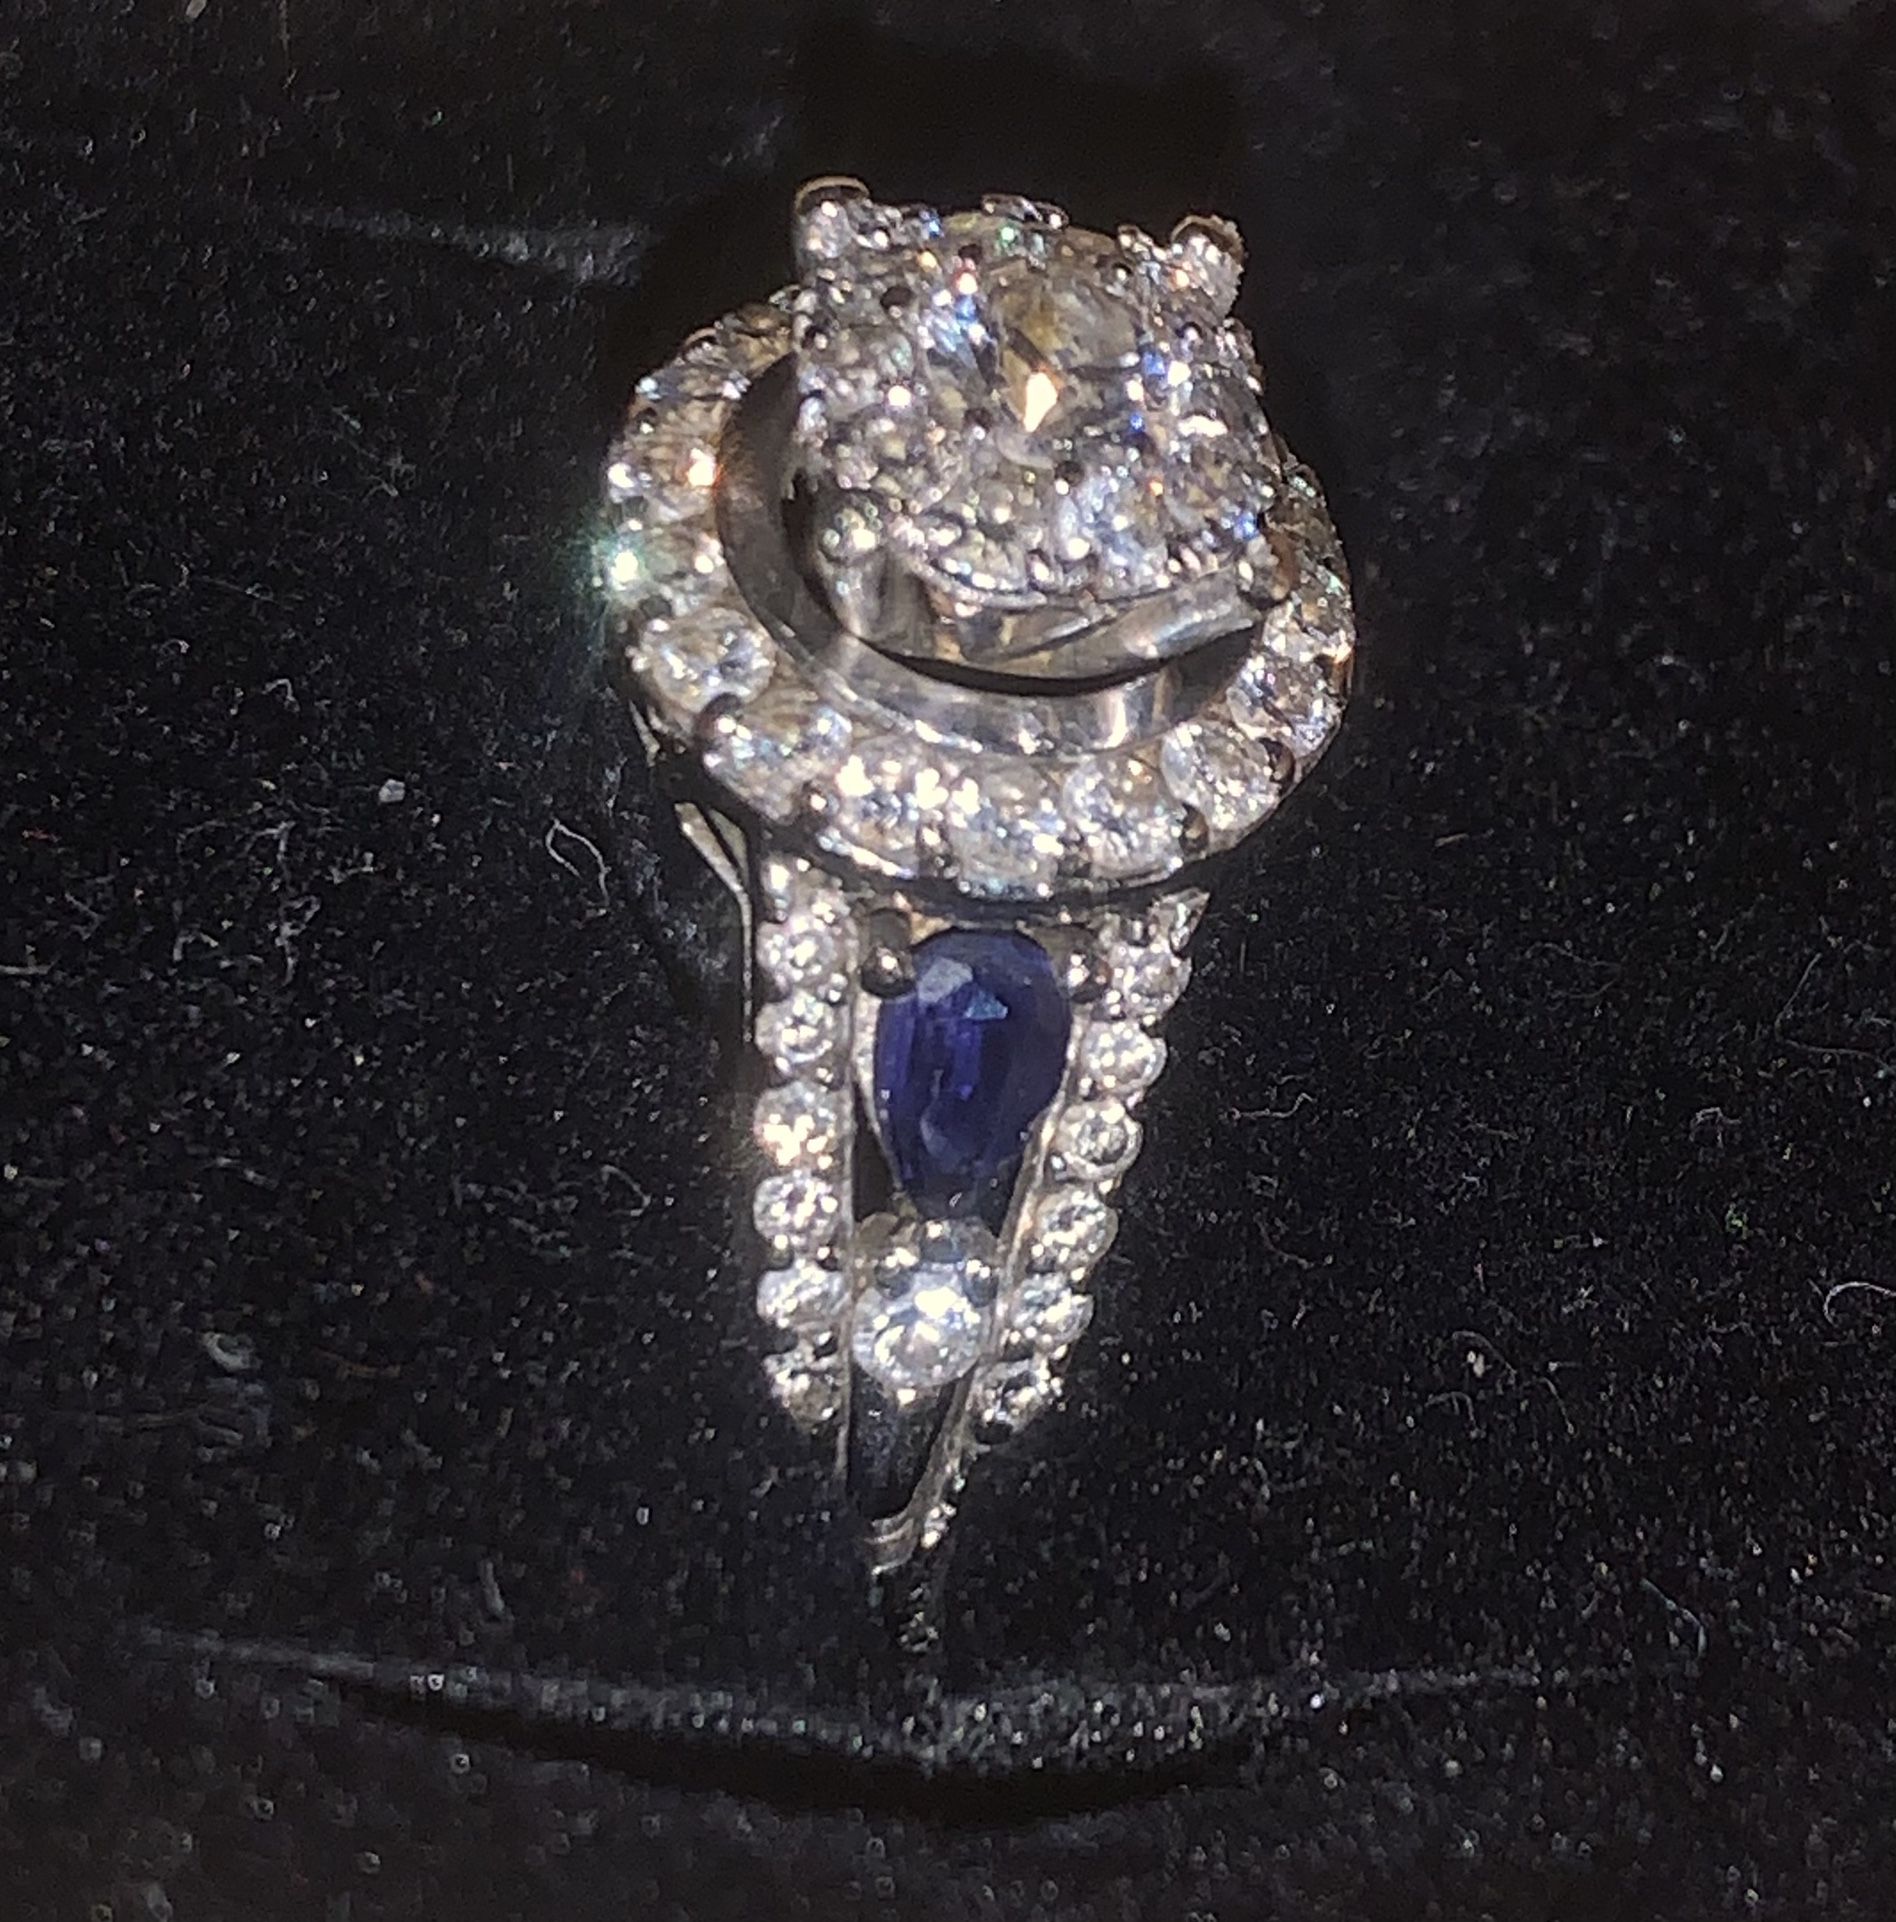 Sz 7 Beautiful Cluster Diamond Engagement Ring With Blue Sapphire Stones